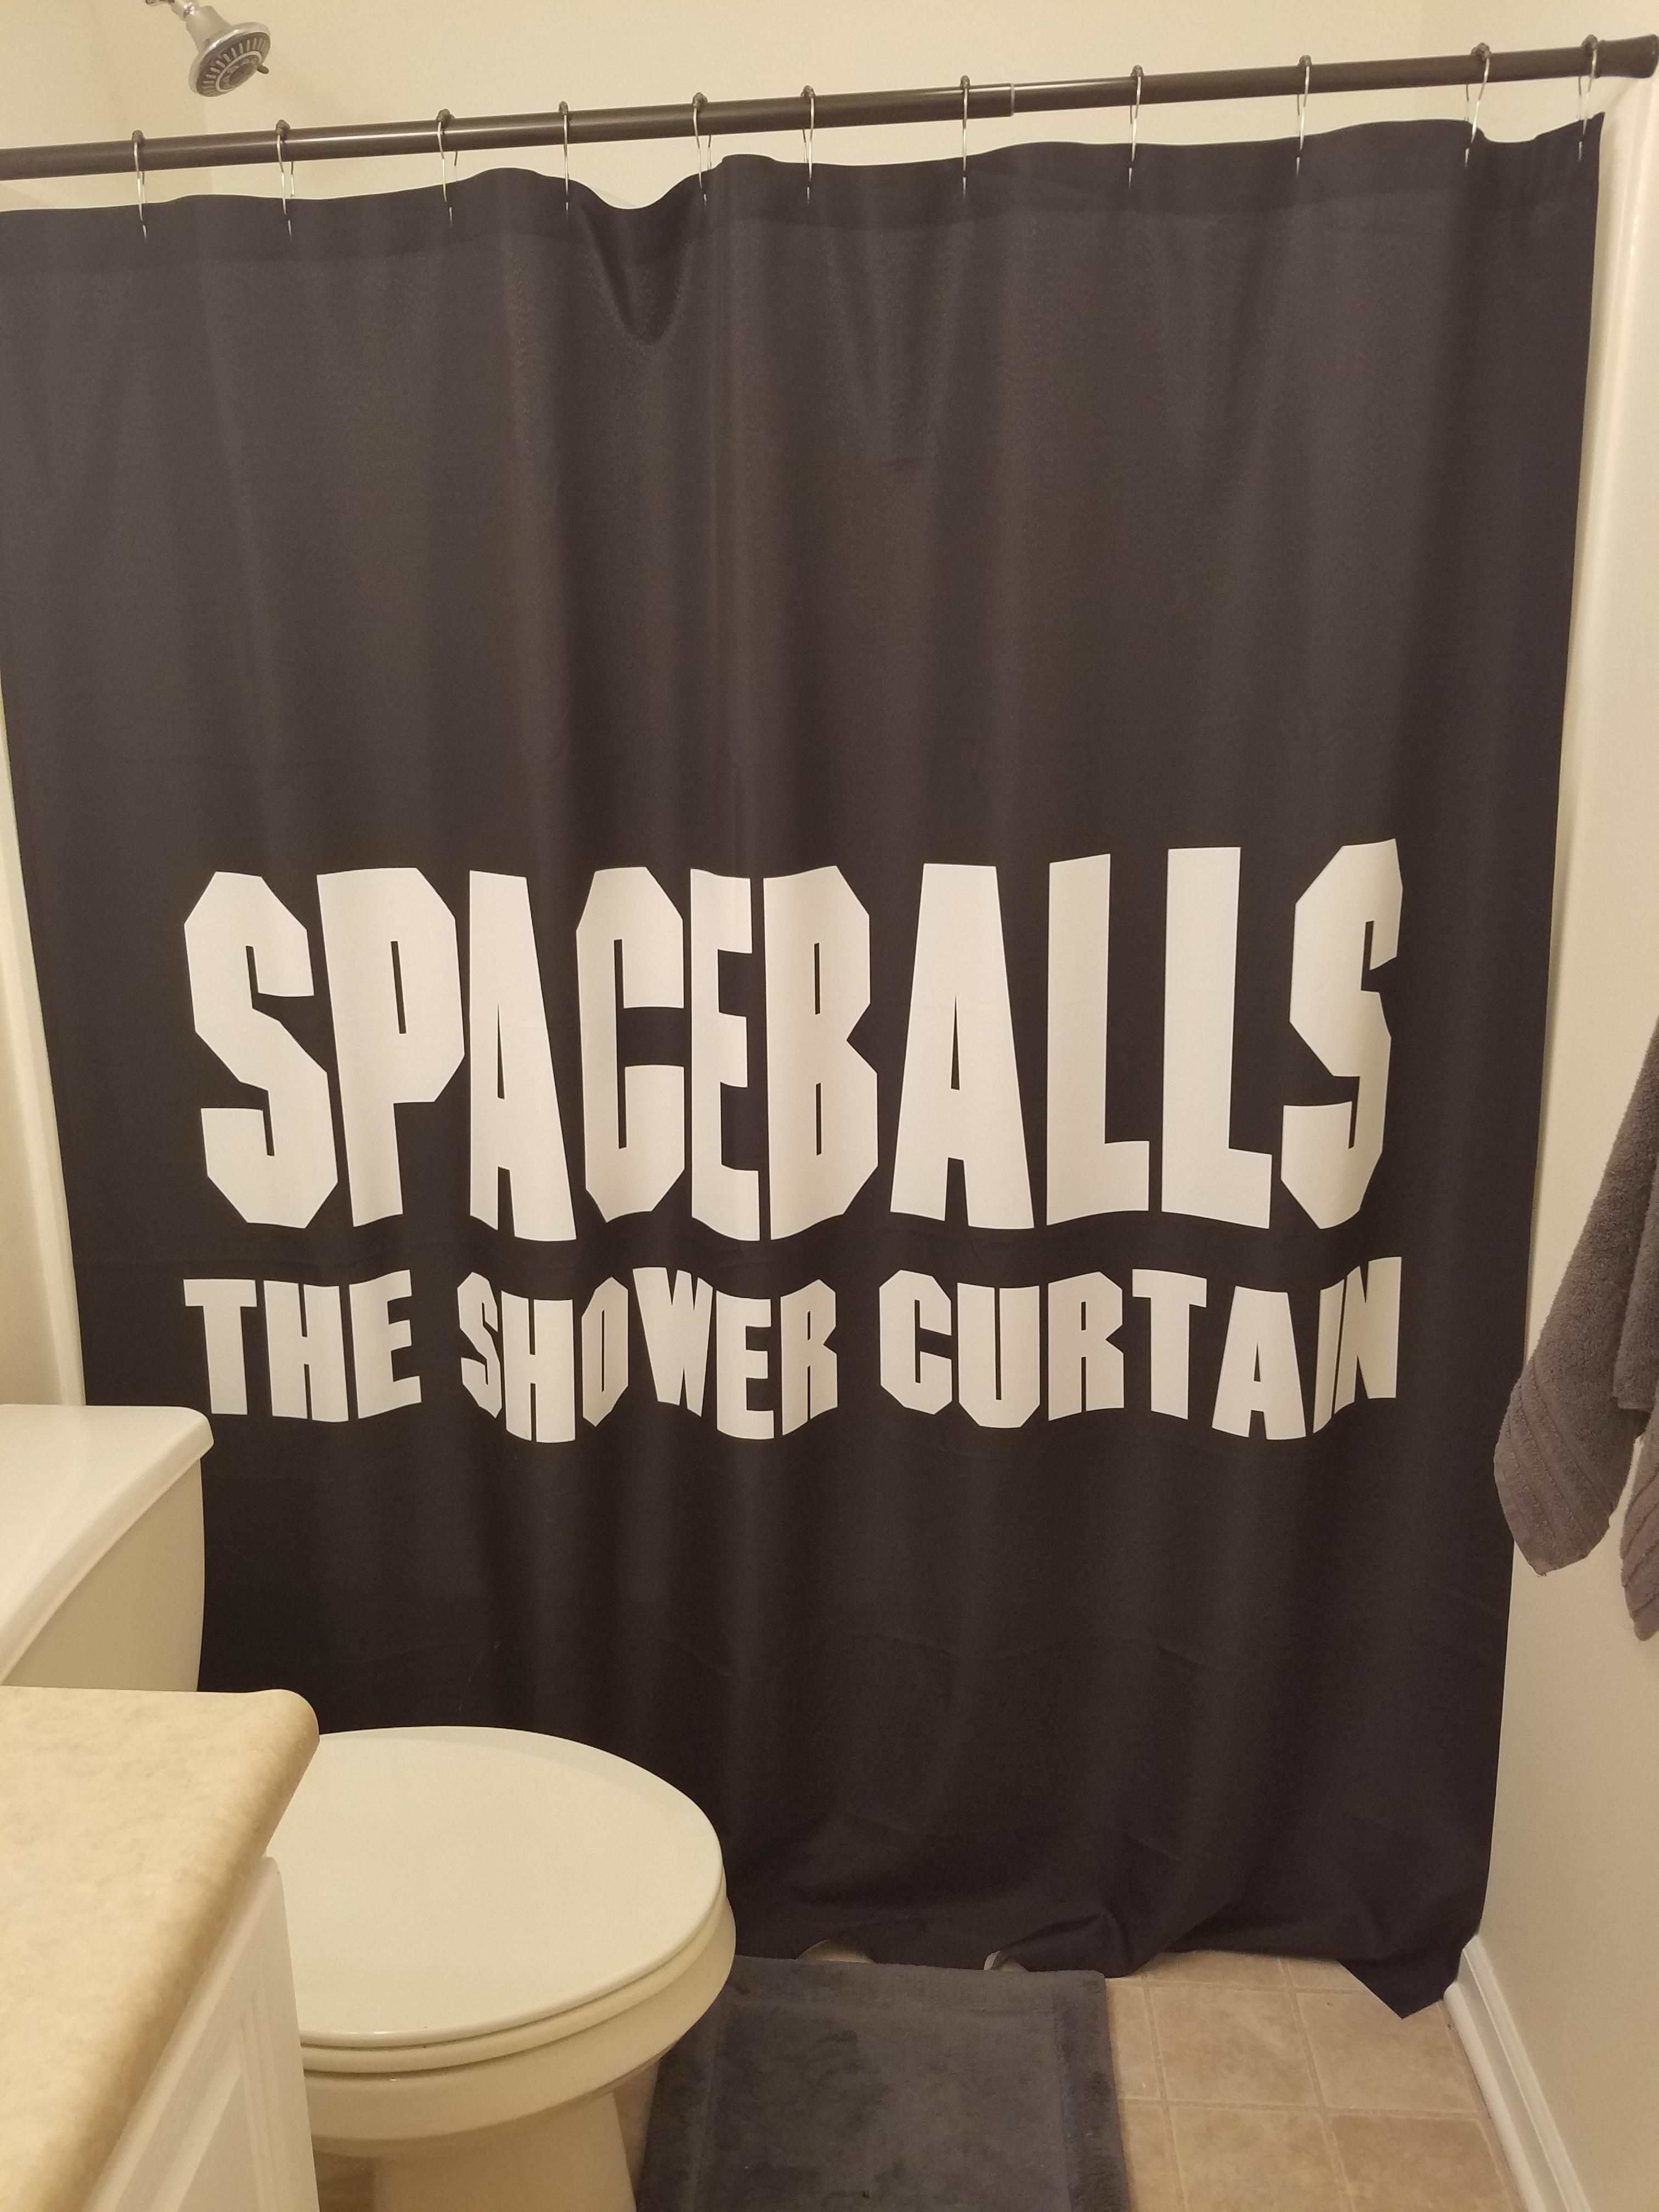 I noticed a lot of shower curtains lately.. Here is the new one I just got for my guest bathroom